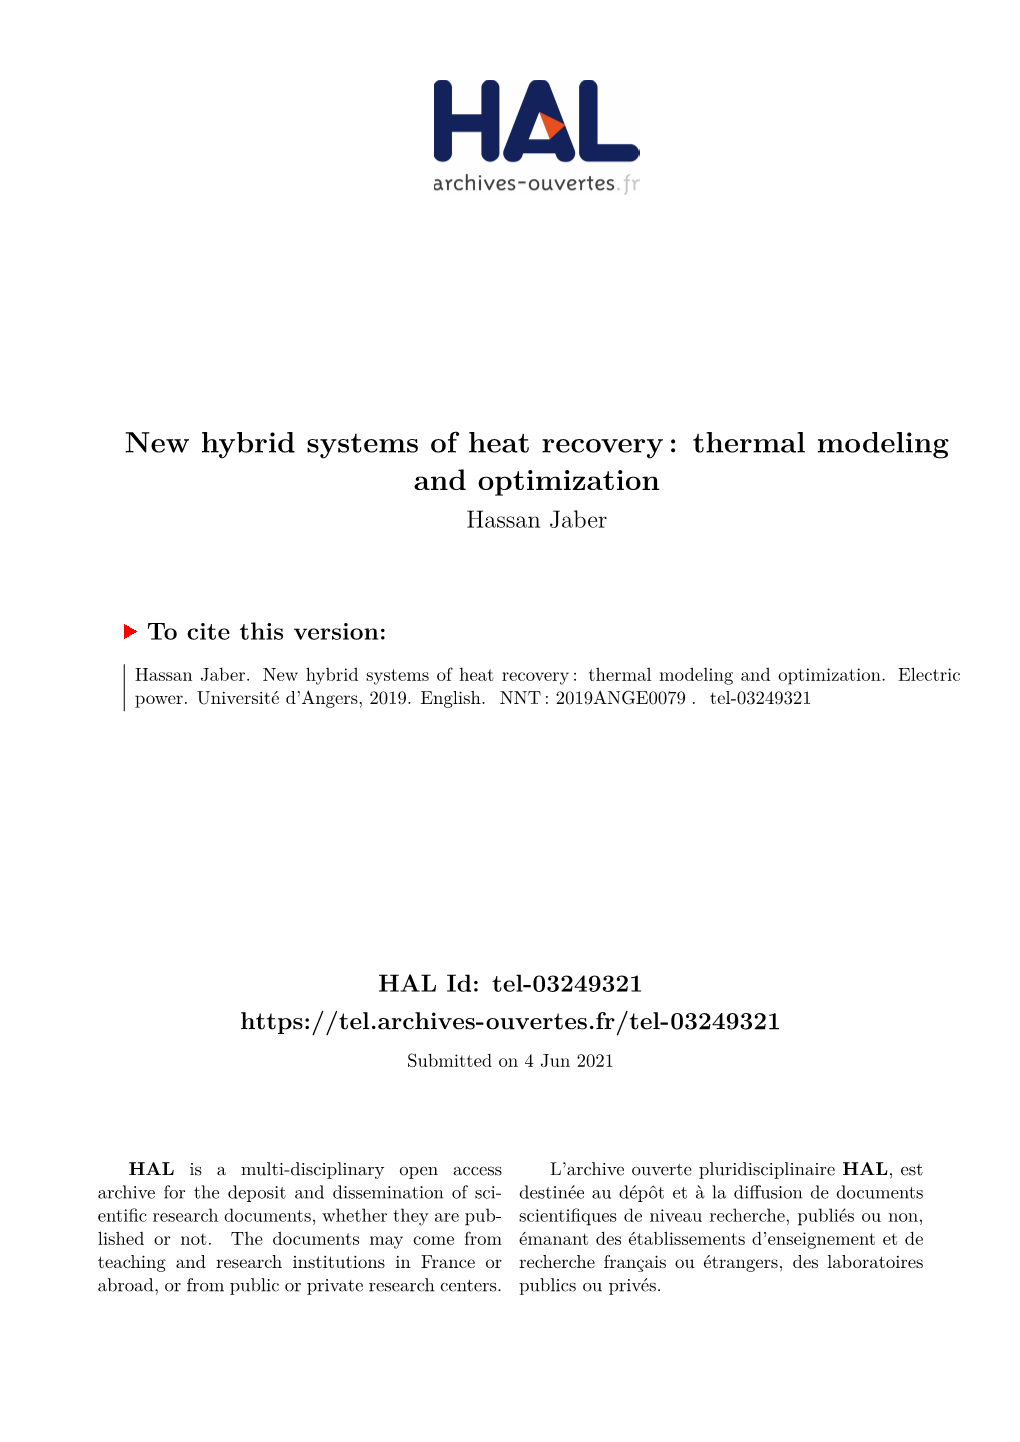 New Hybrid Systems of Heat Recovery: Thermal Modeling and Optimization